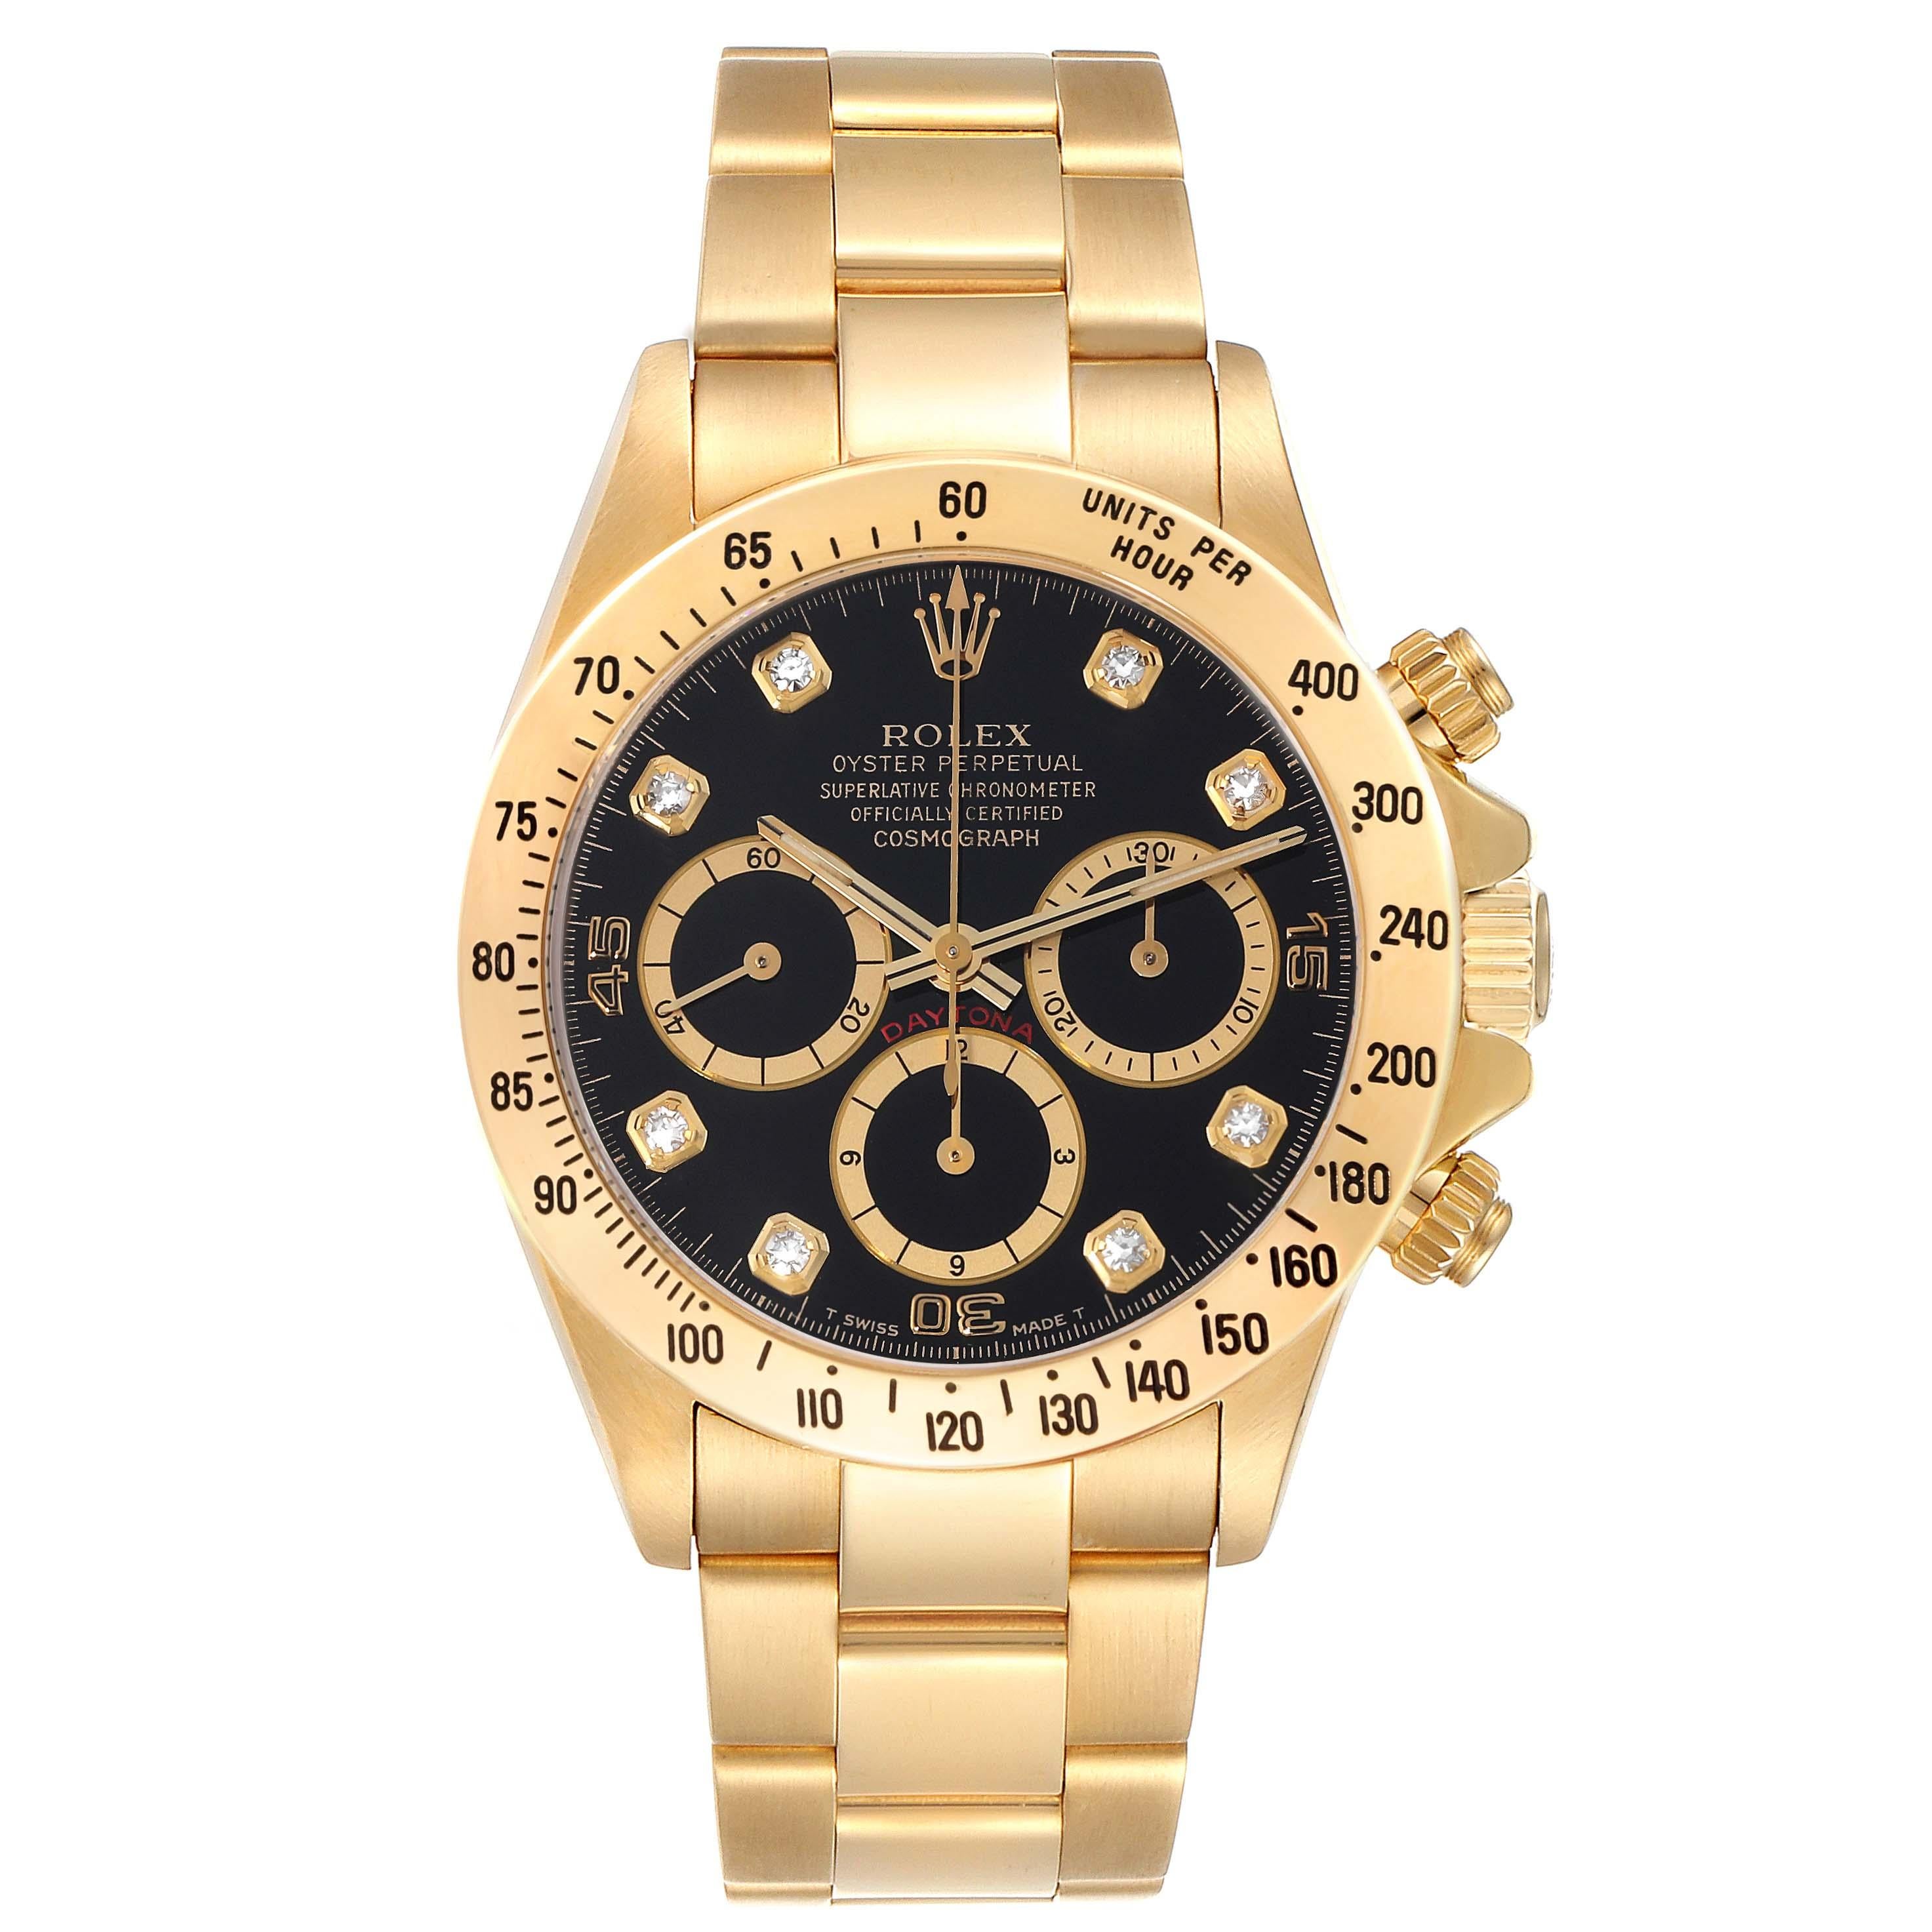 Rolex Daytona Yellow Gold Inverted 6 Diamond Dial Mens Watch 16528 In Excellent Condition For Sale In Atlanta, GA